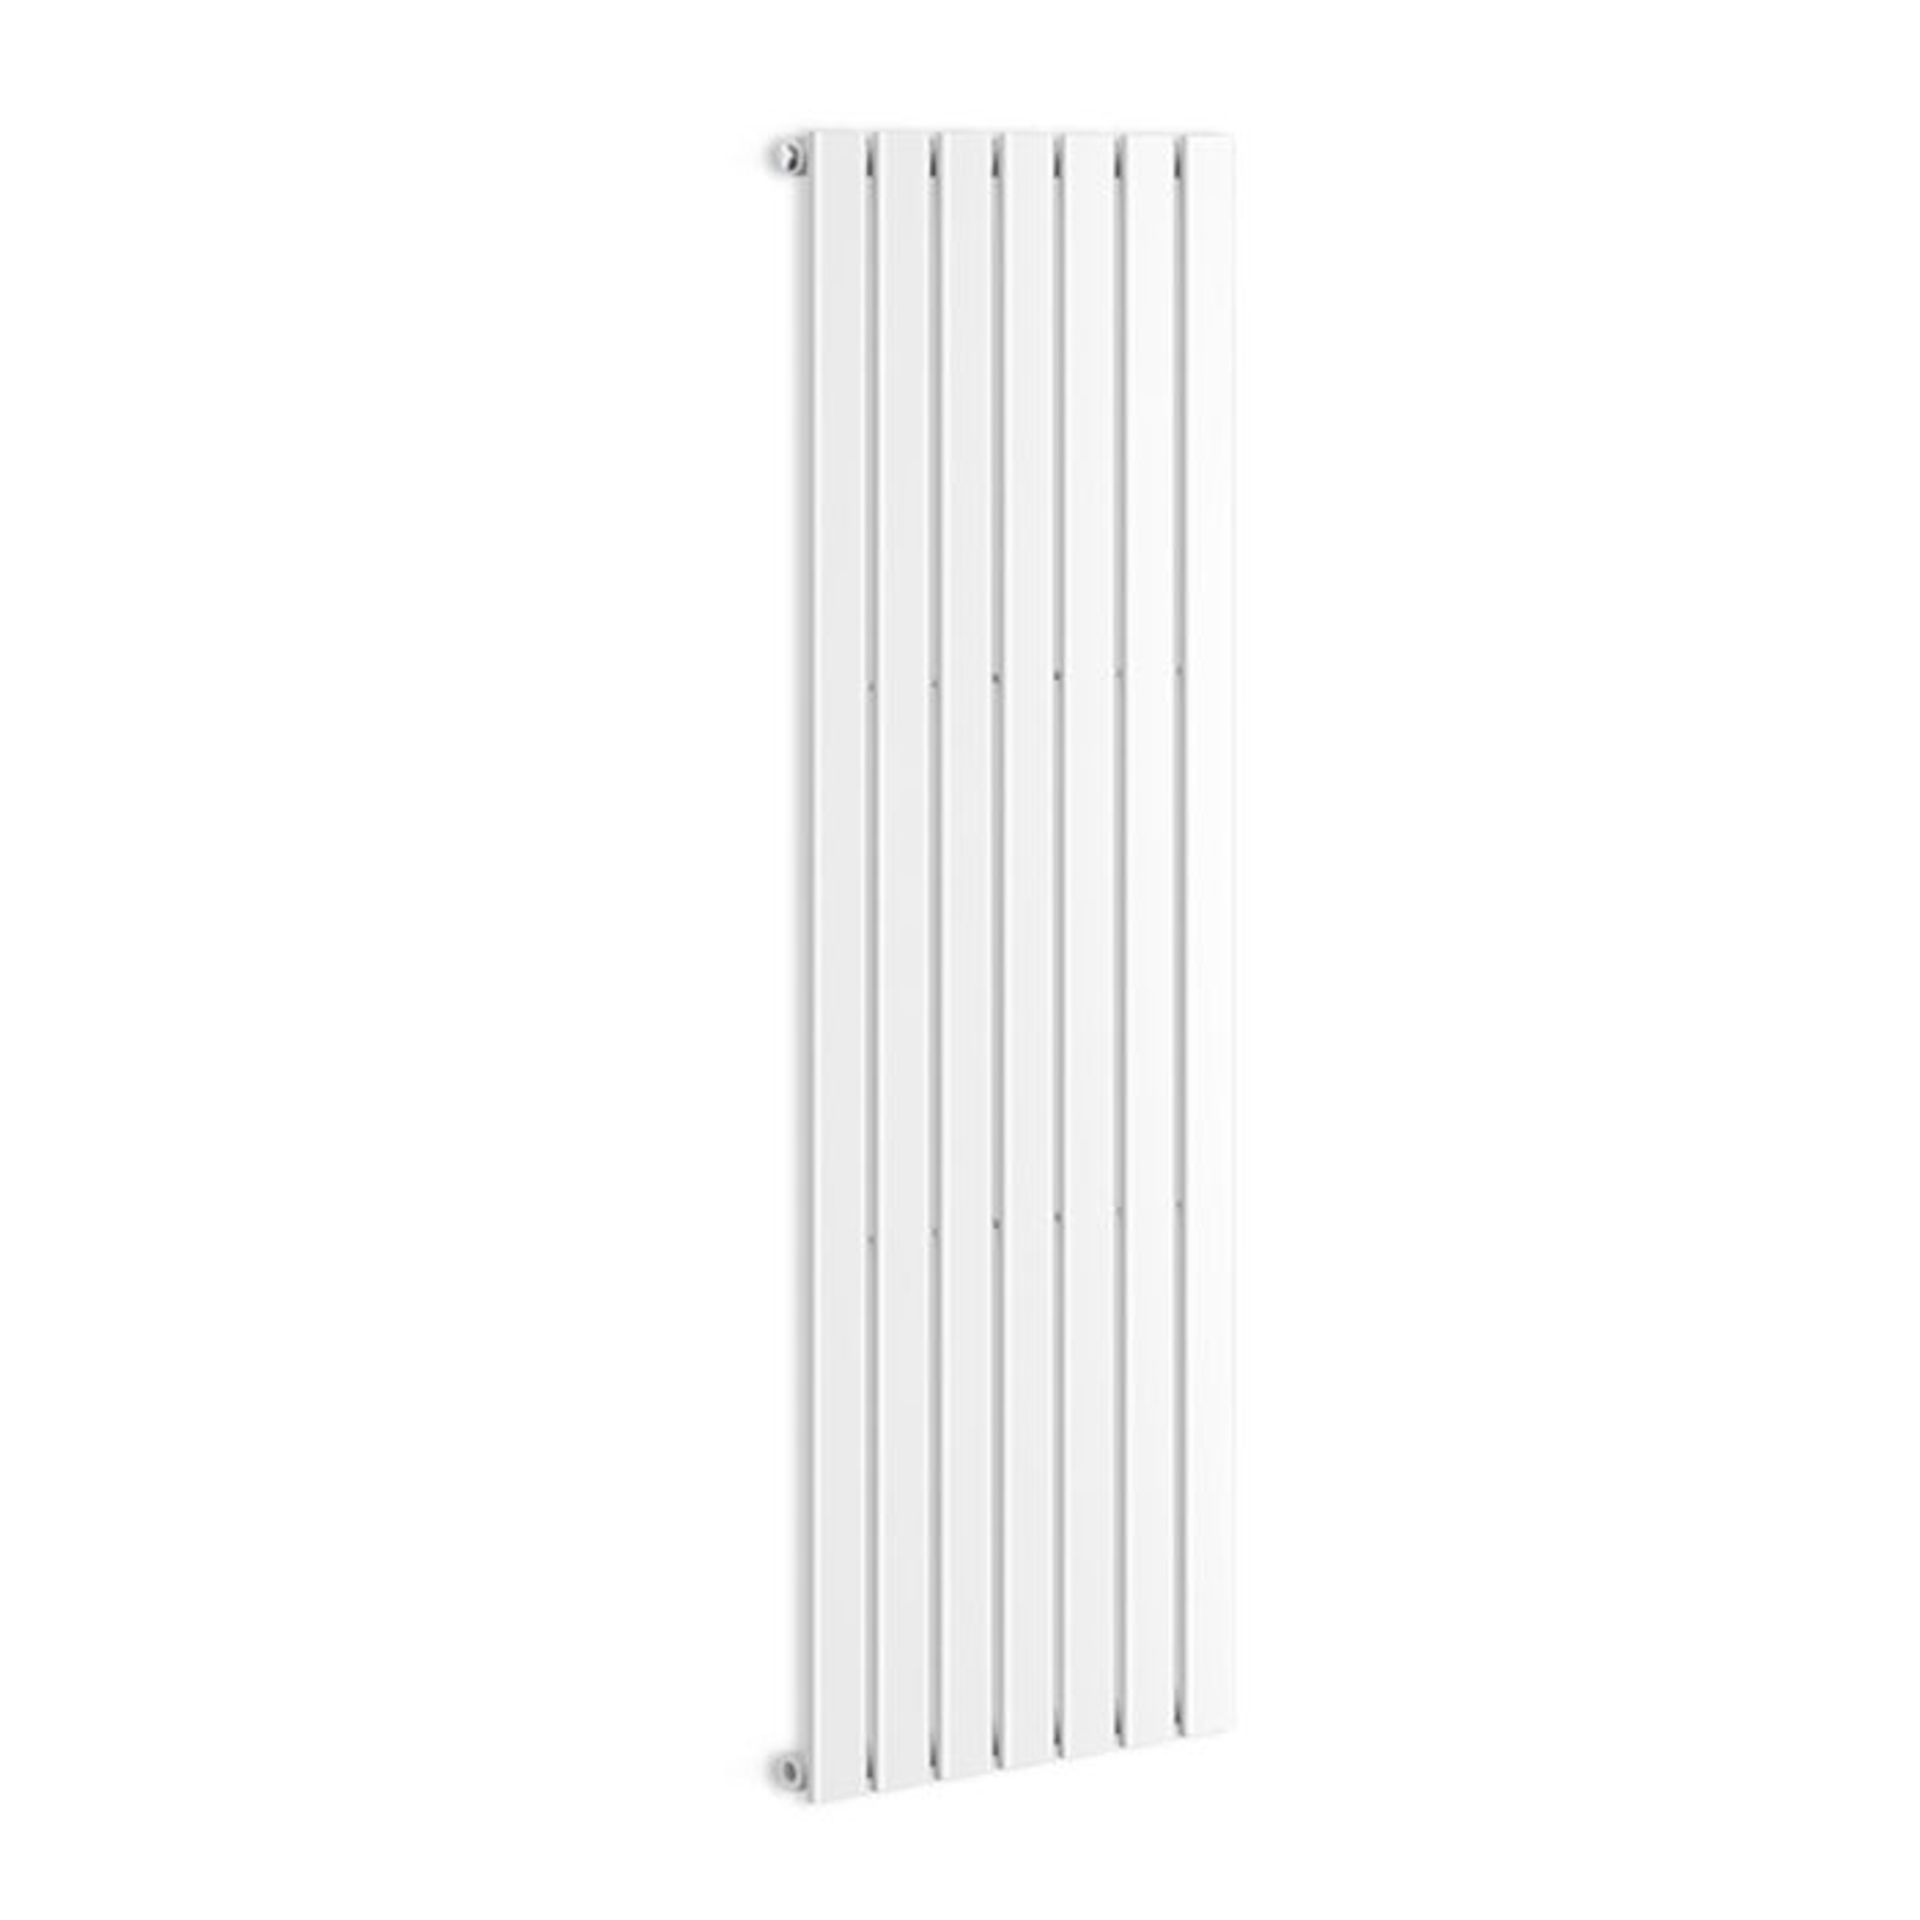 (PT234) 1800x532mm White Panel Vertical Radiator. RRP £268.99. Made from low carbon steel with a